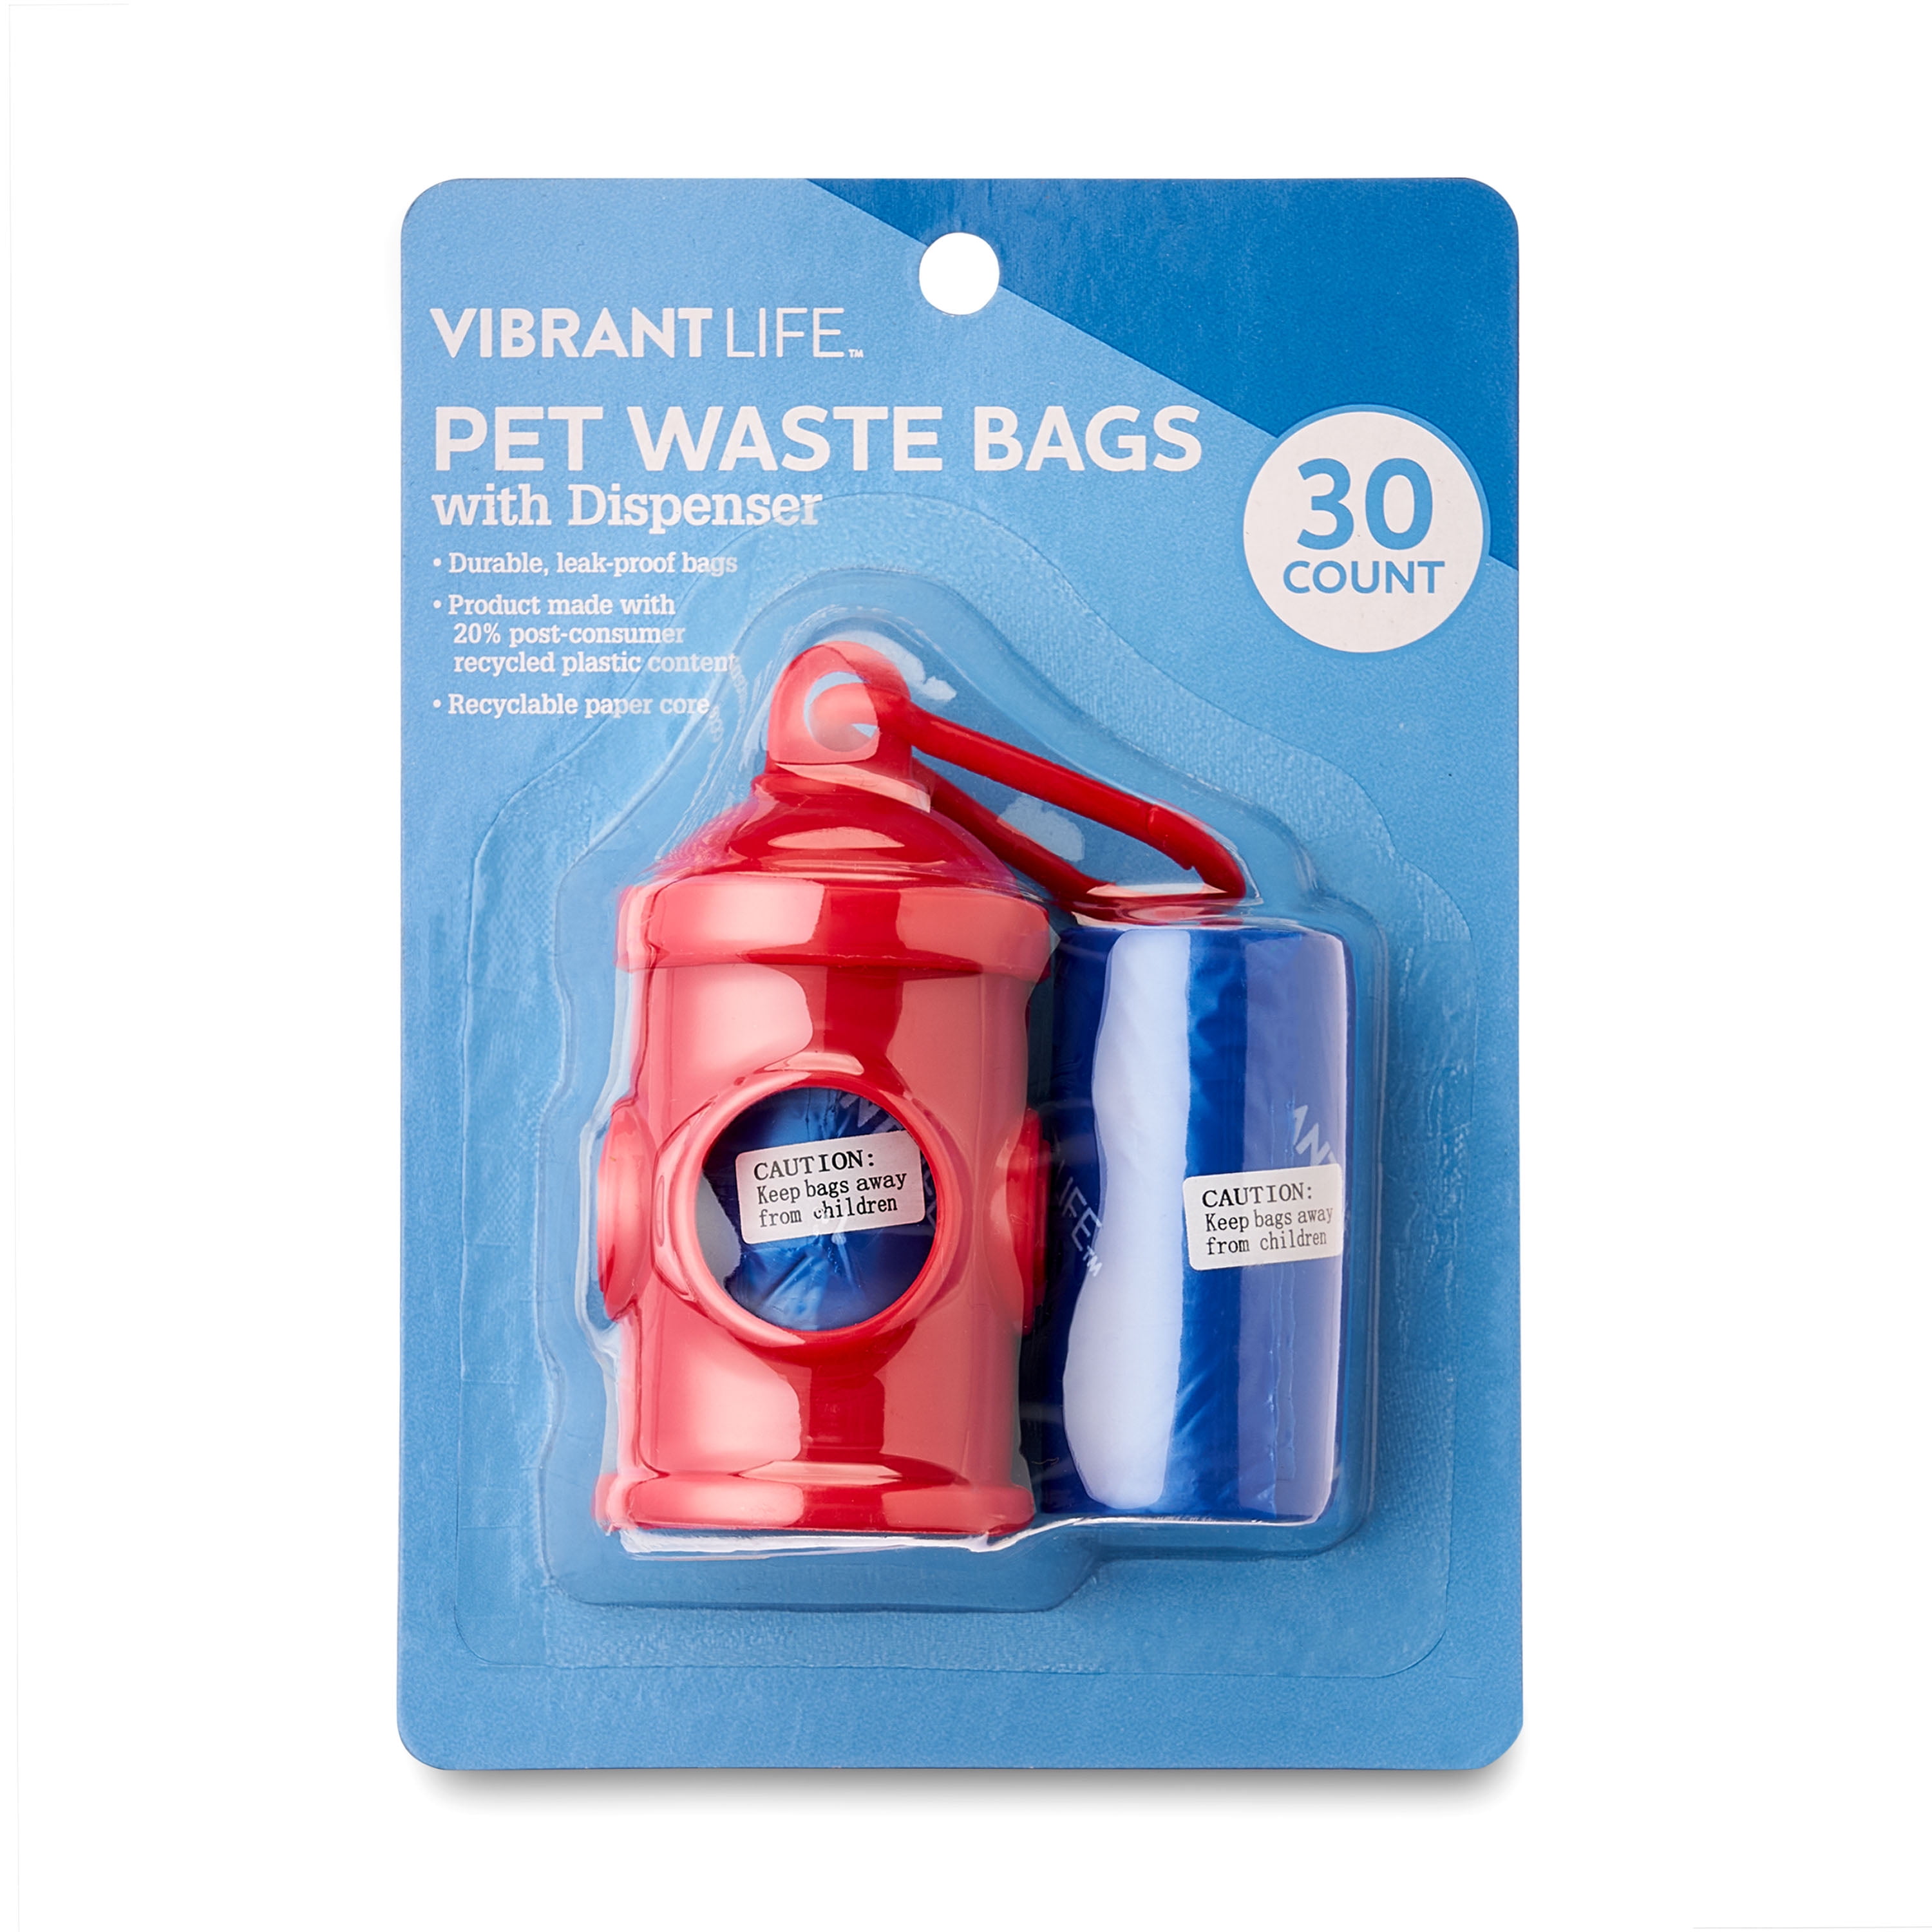 Vibrant Life Pet Waste Bags with Dispenser, 30 Count